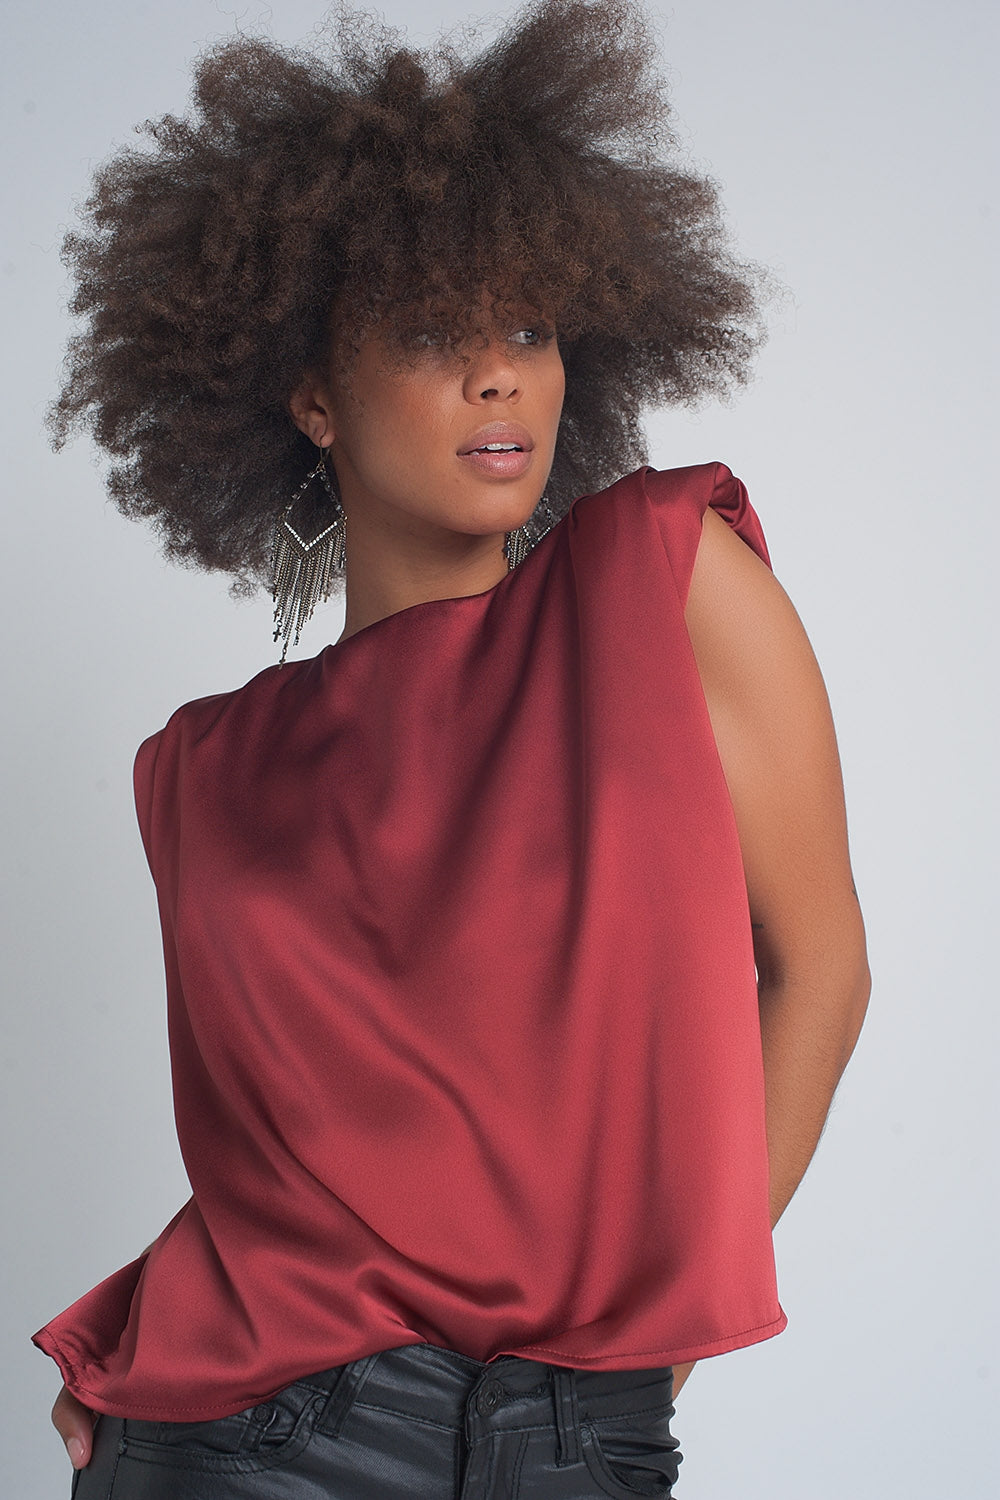 Gathered satin shoulder pad sleeveless top in red Szua Store